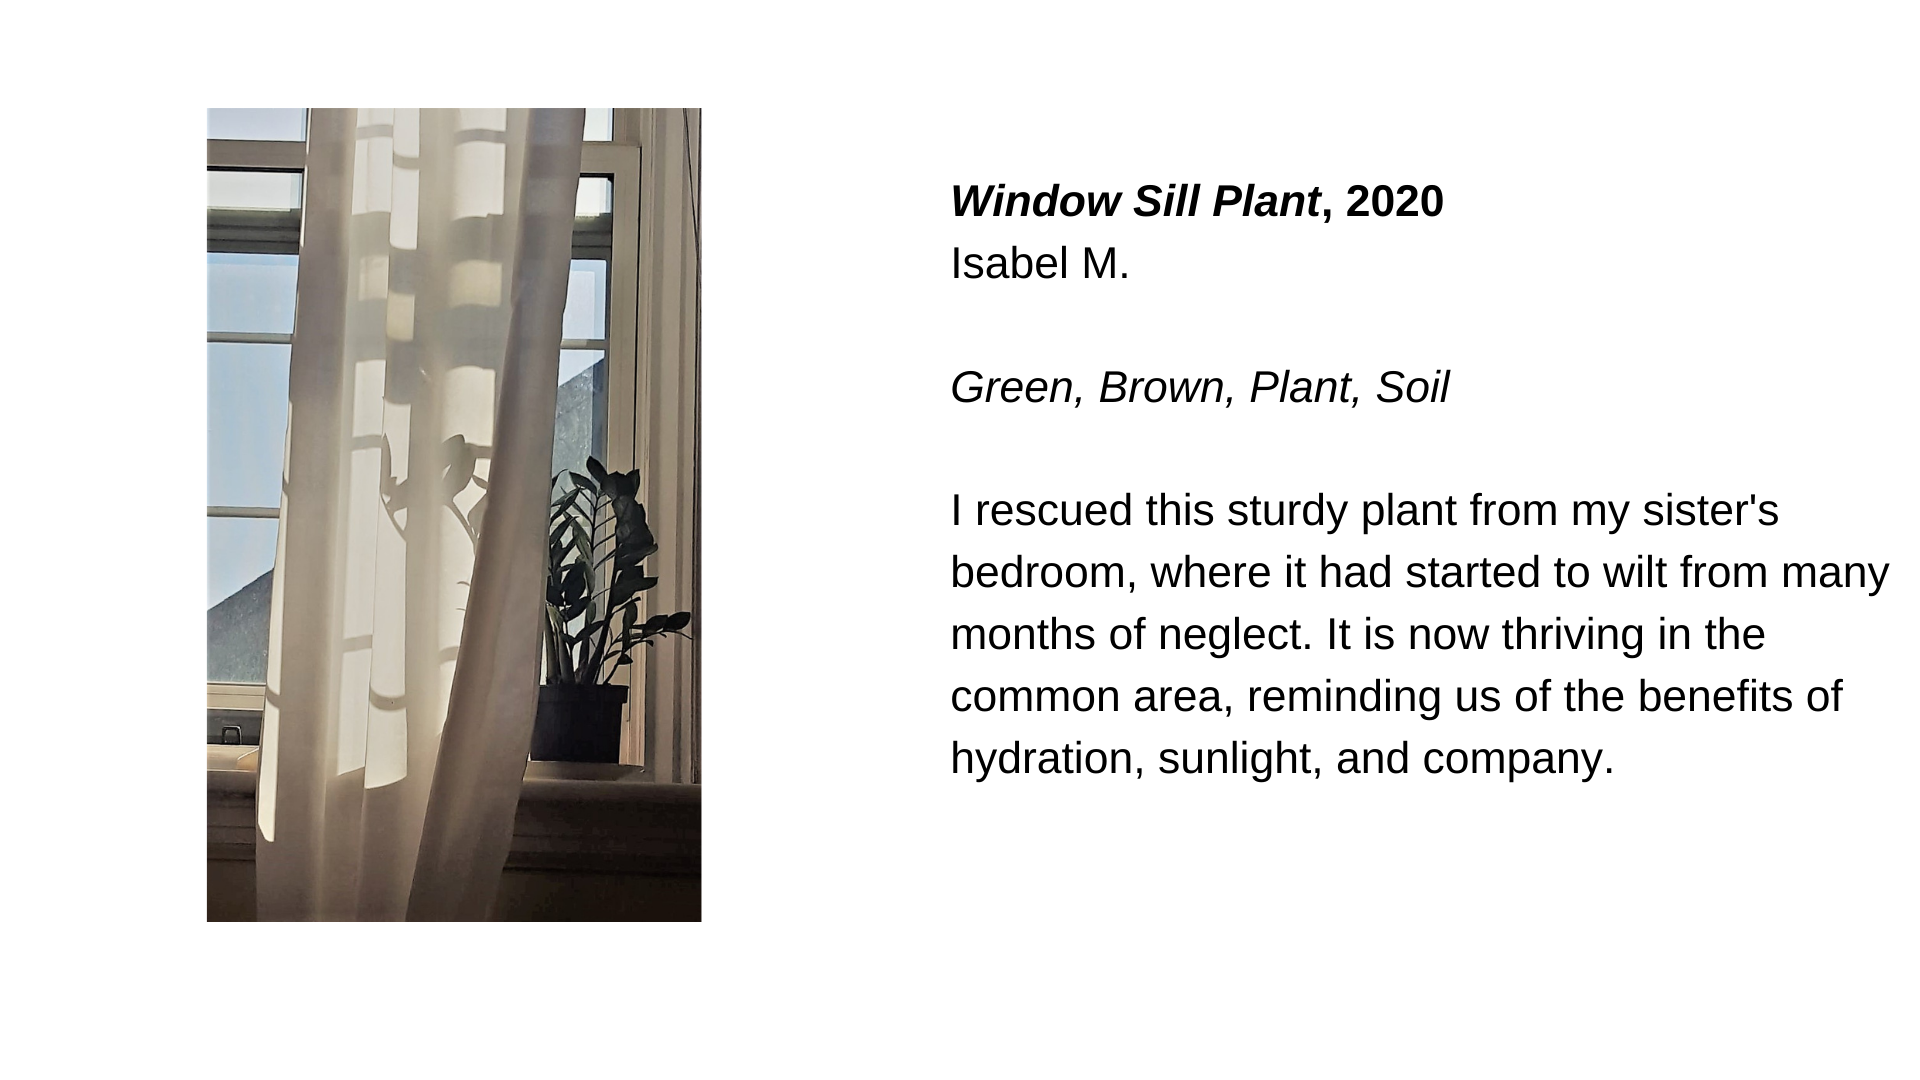  A potted plant on a windowsill next to a white curtain. Next to this image is the text, “Window Sill Plant, 2020 - Isabel M. Green, Brown, Plant, Soil. I rescued this sturdy plant from my sister's bedroom, where it had started to wilt from many mont